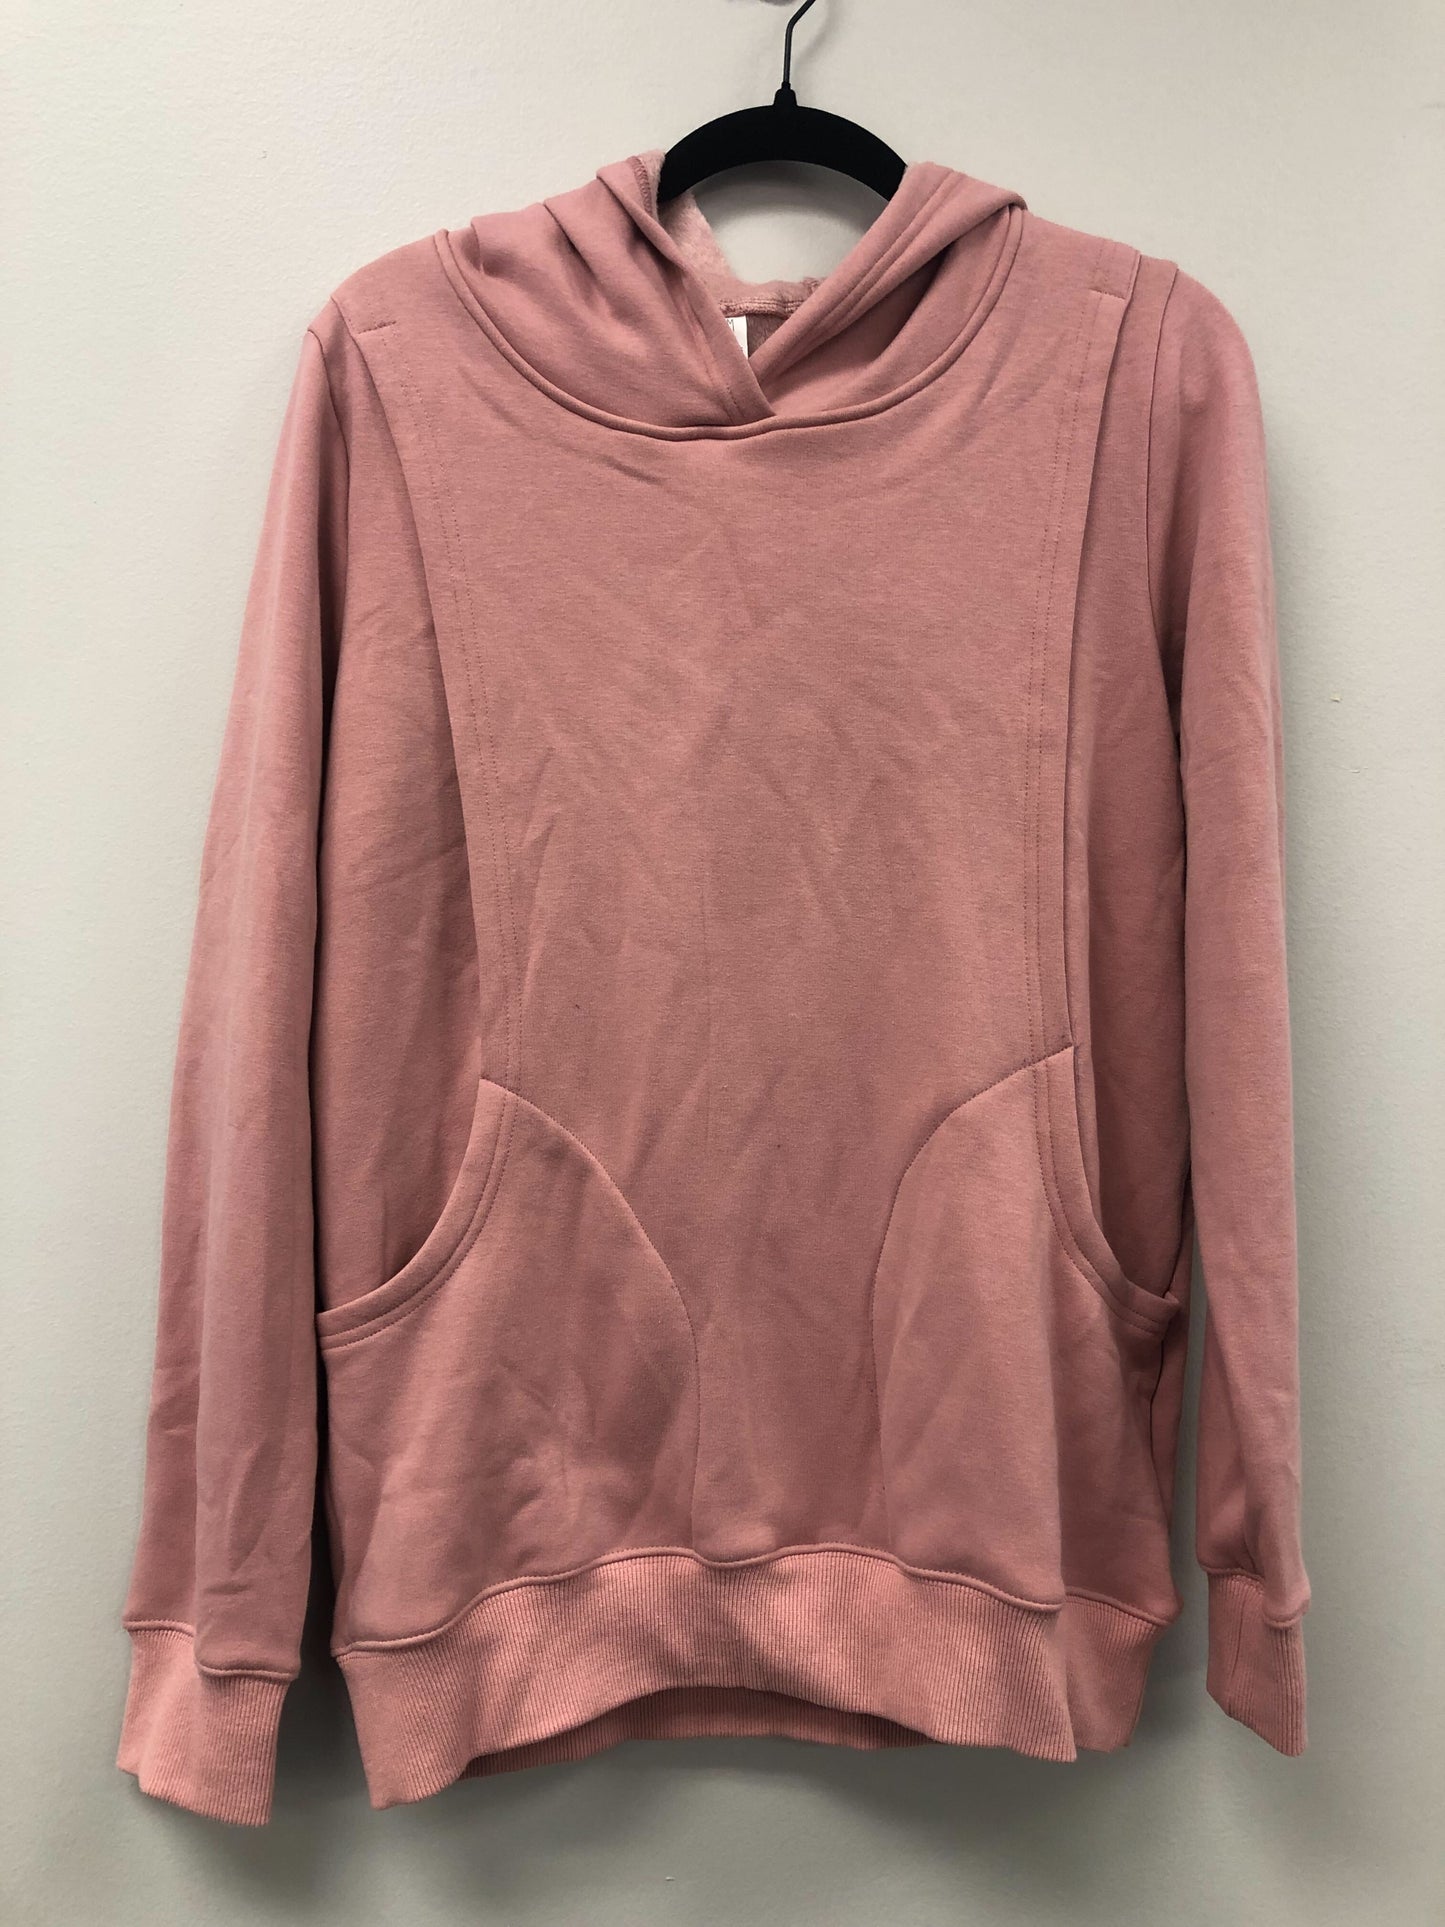 Outlet 5512 - The Latched Mama Heavy Hoodie - Rose Blush - Medium